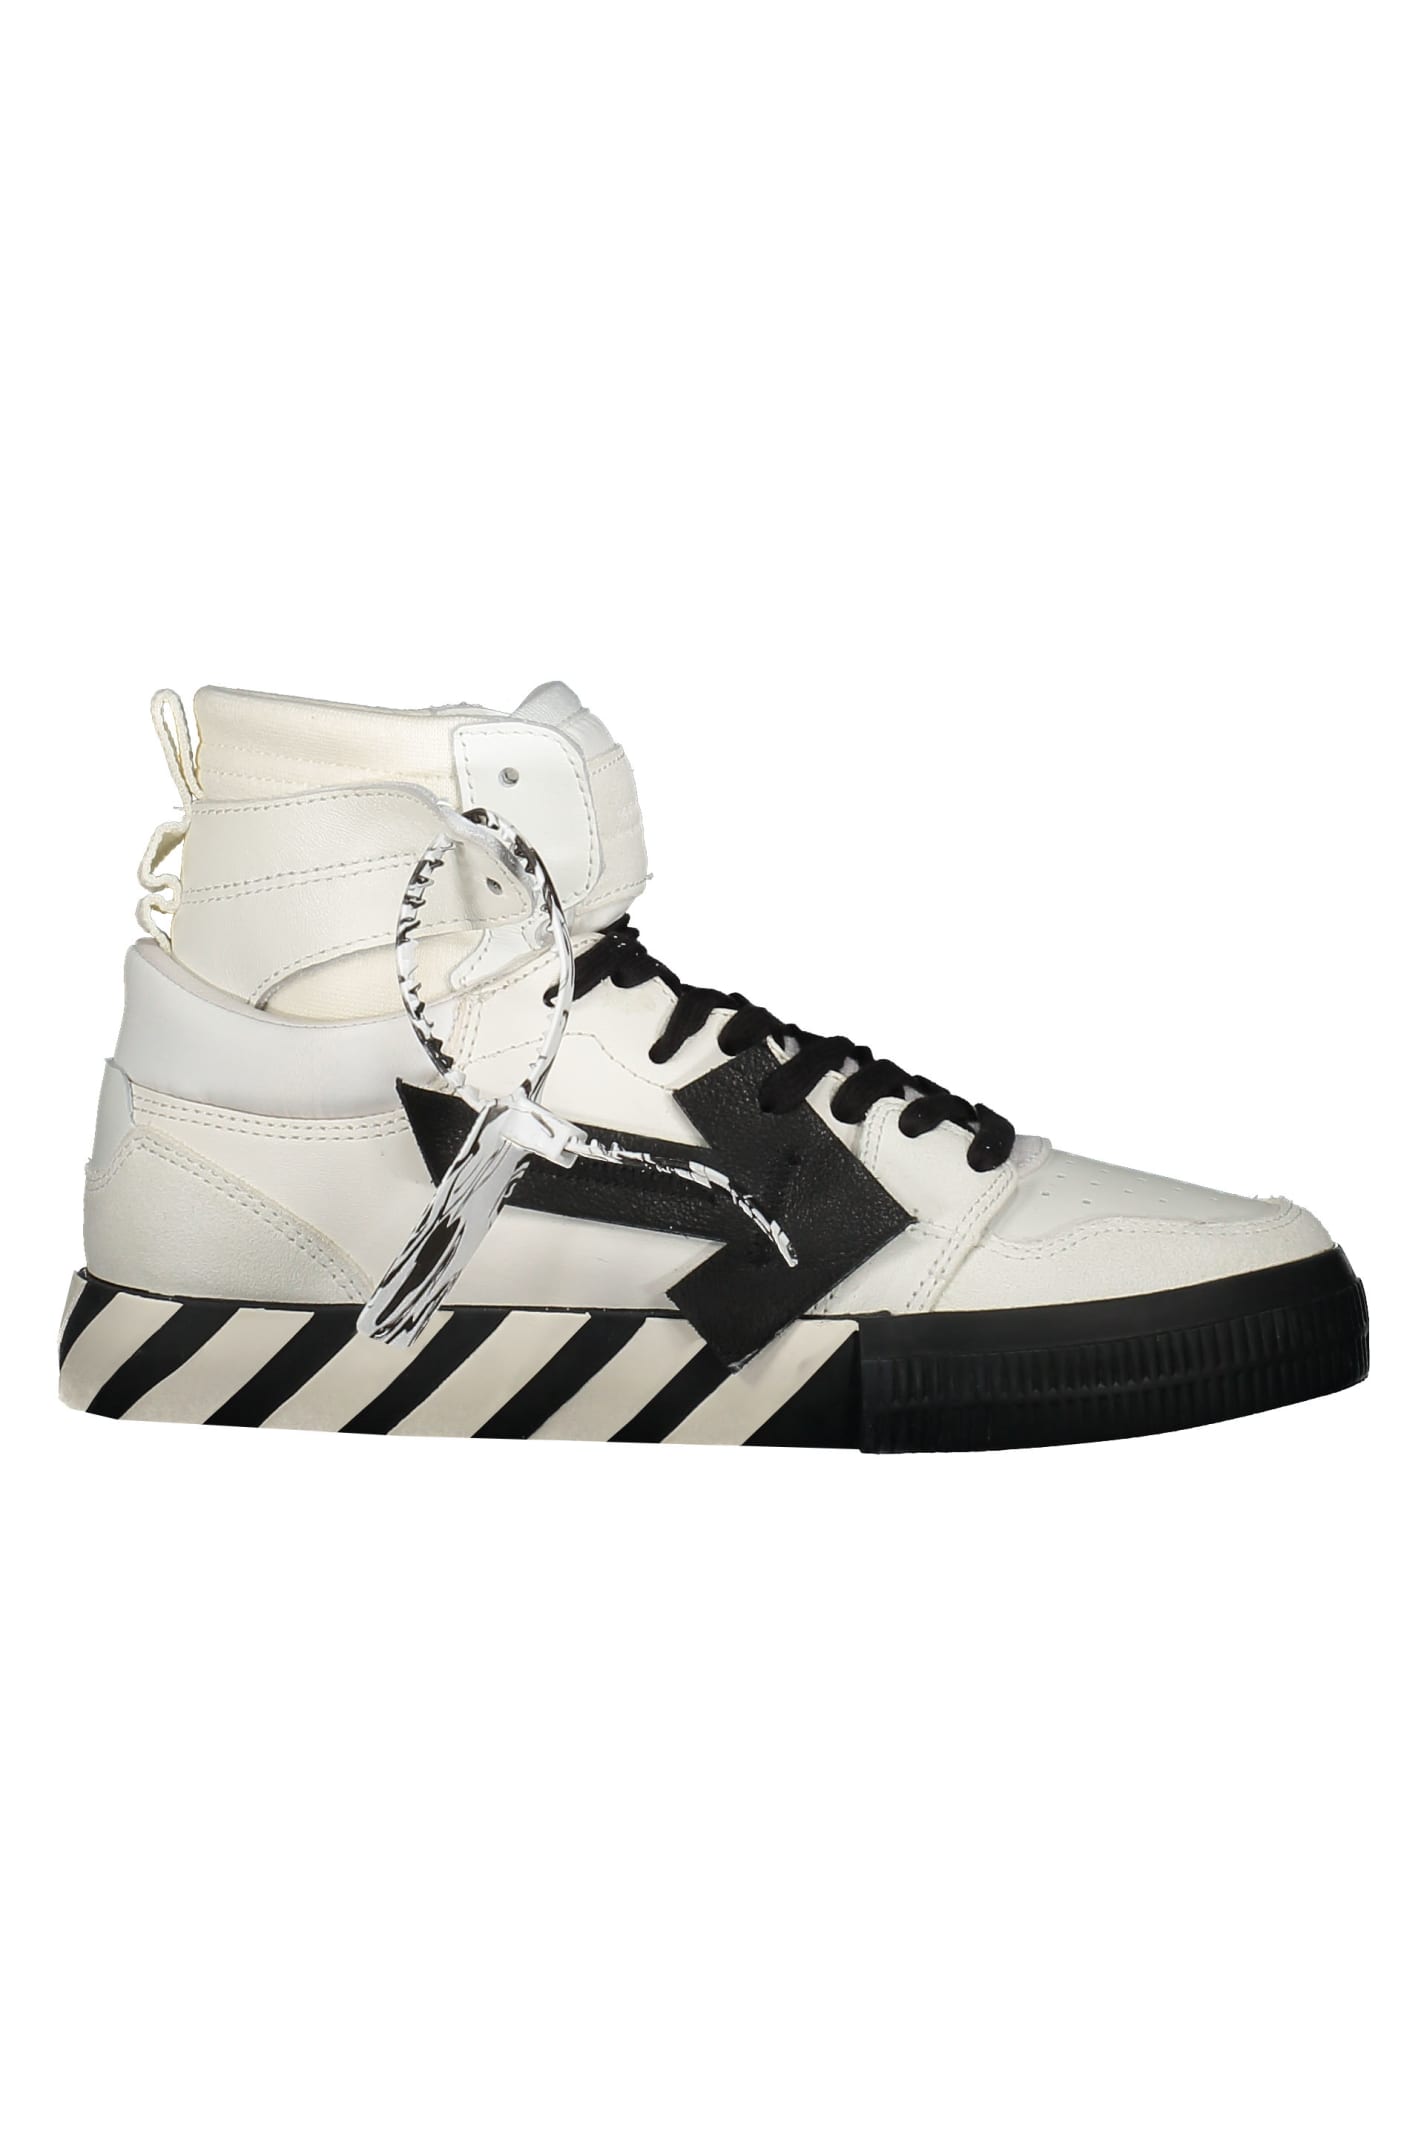 Off-White Vulcanized High-top Sneakers